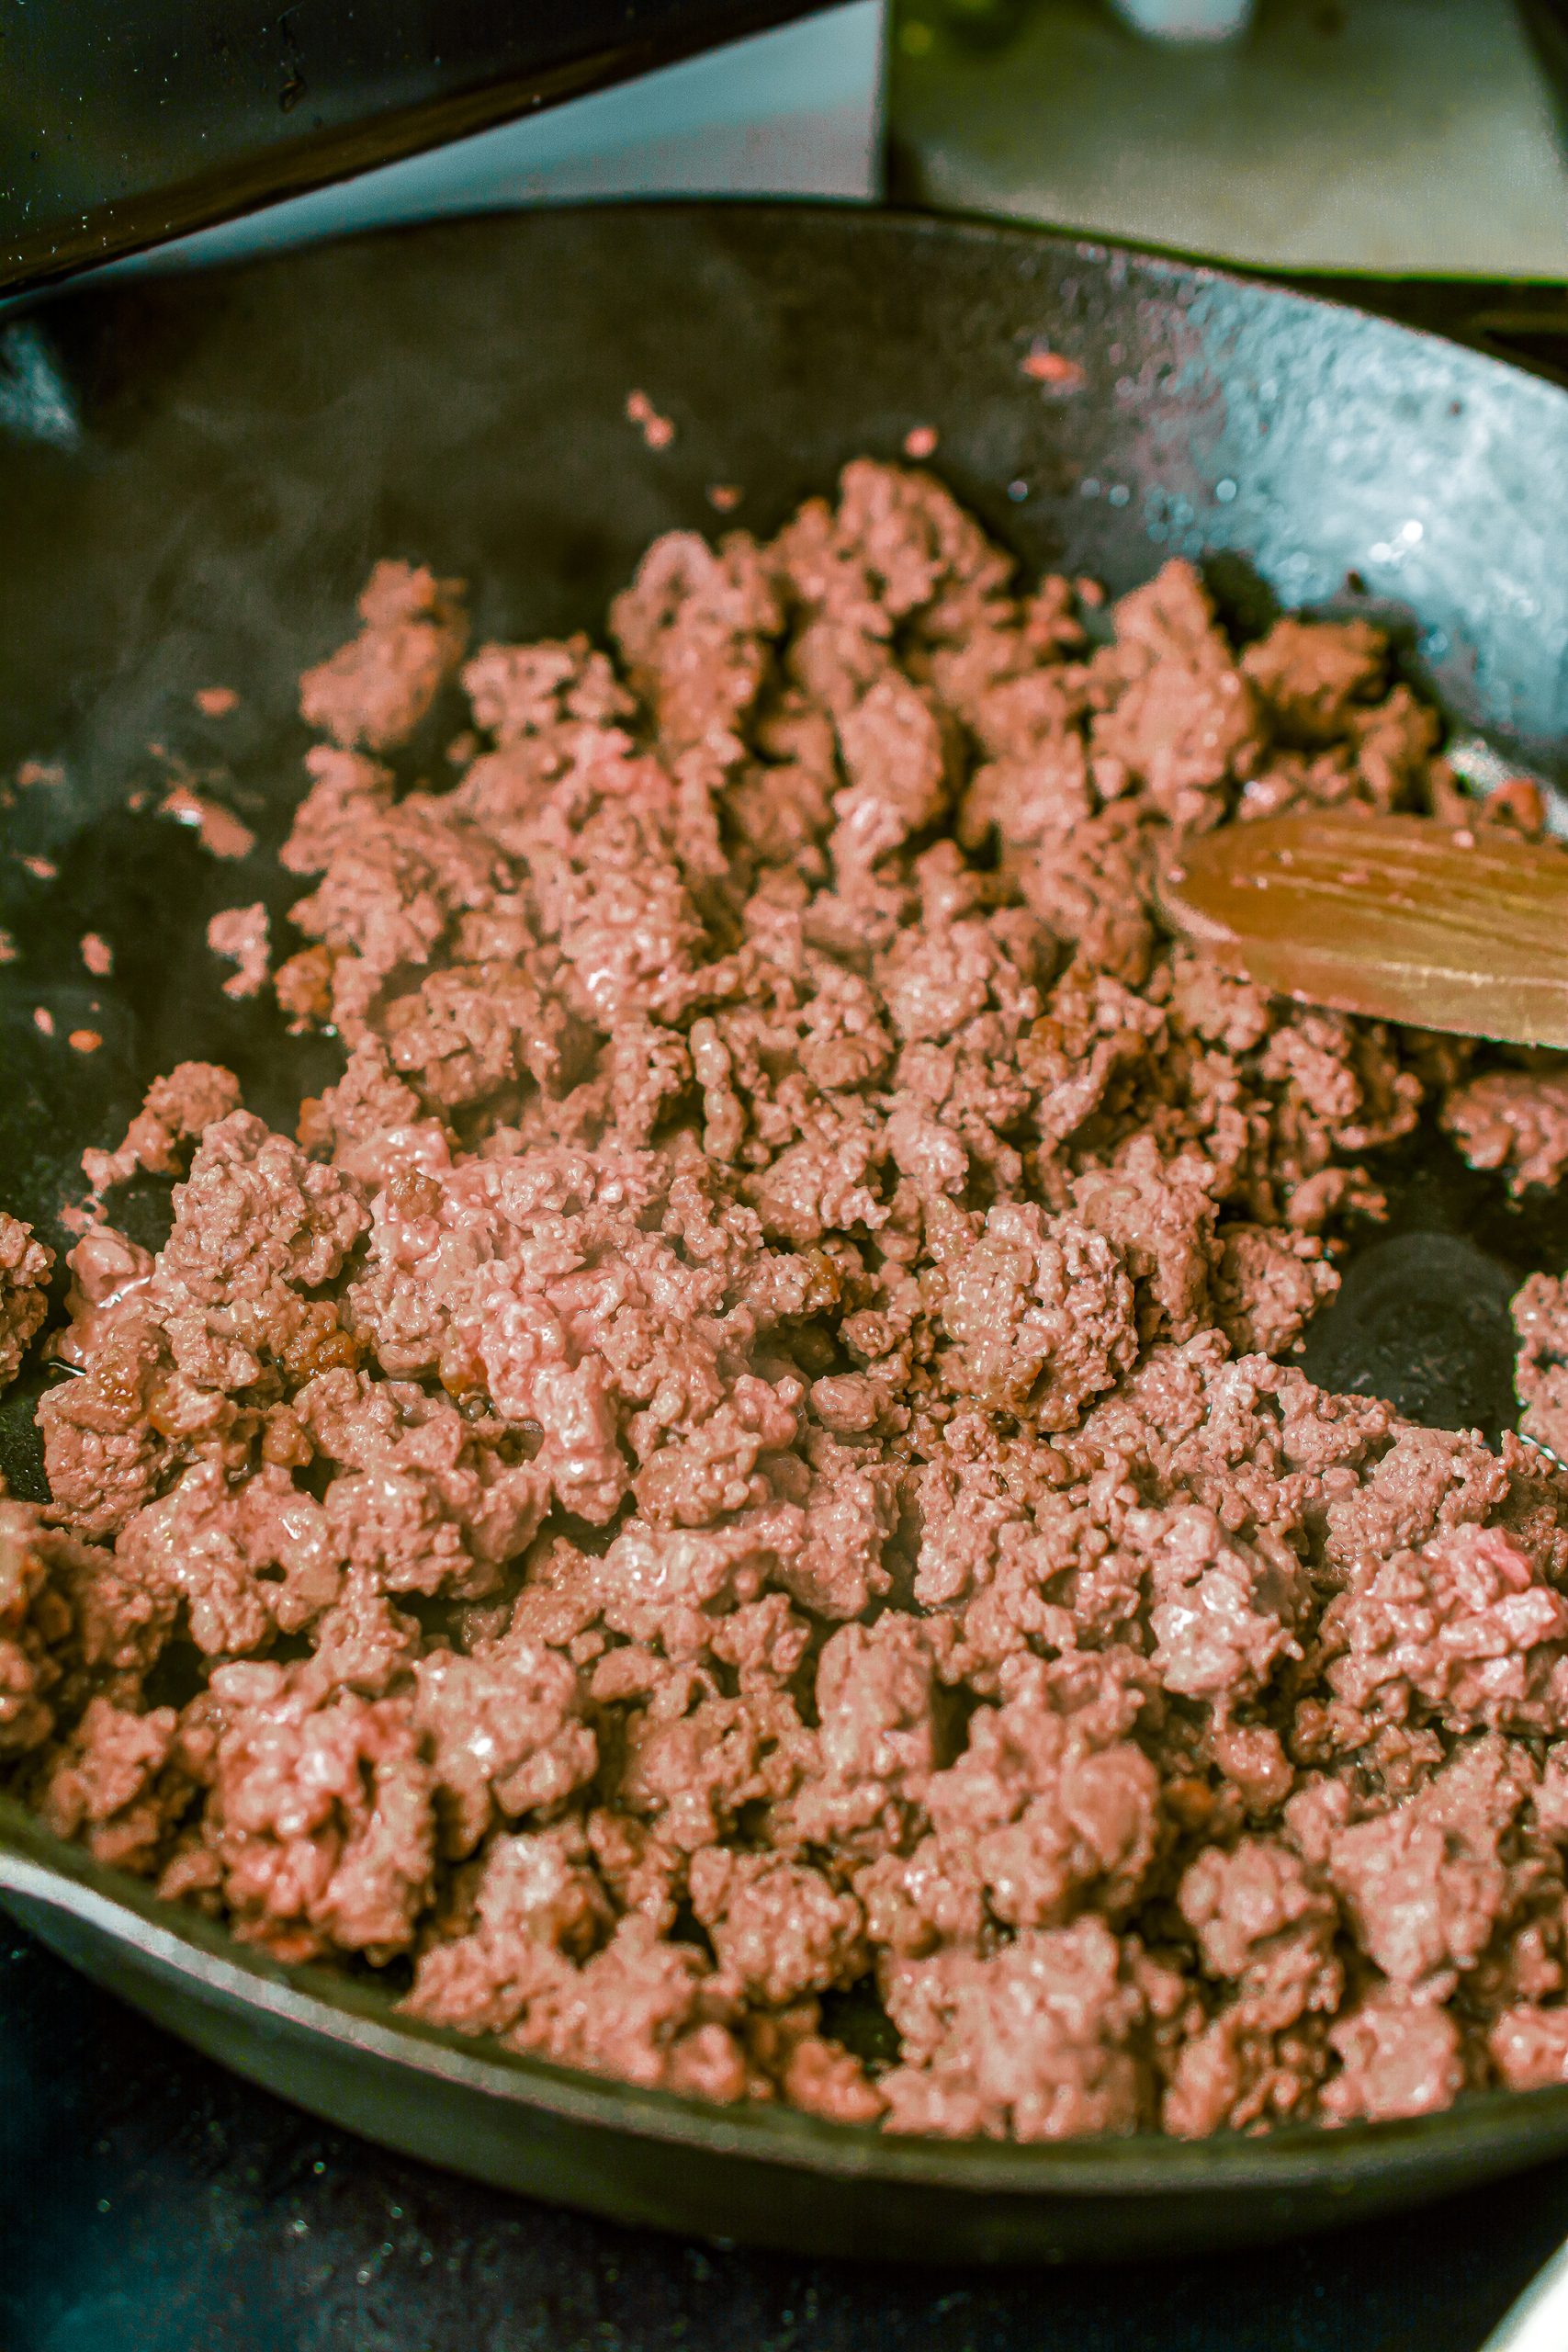 Brown the ground beef in a skillet